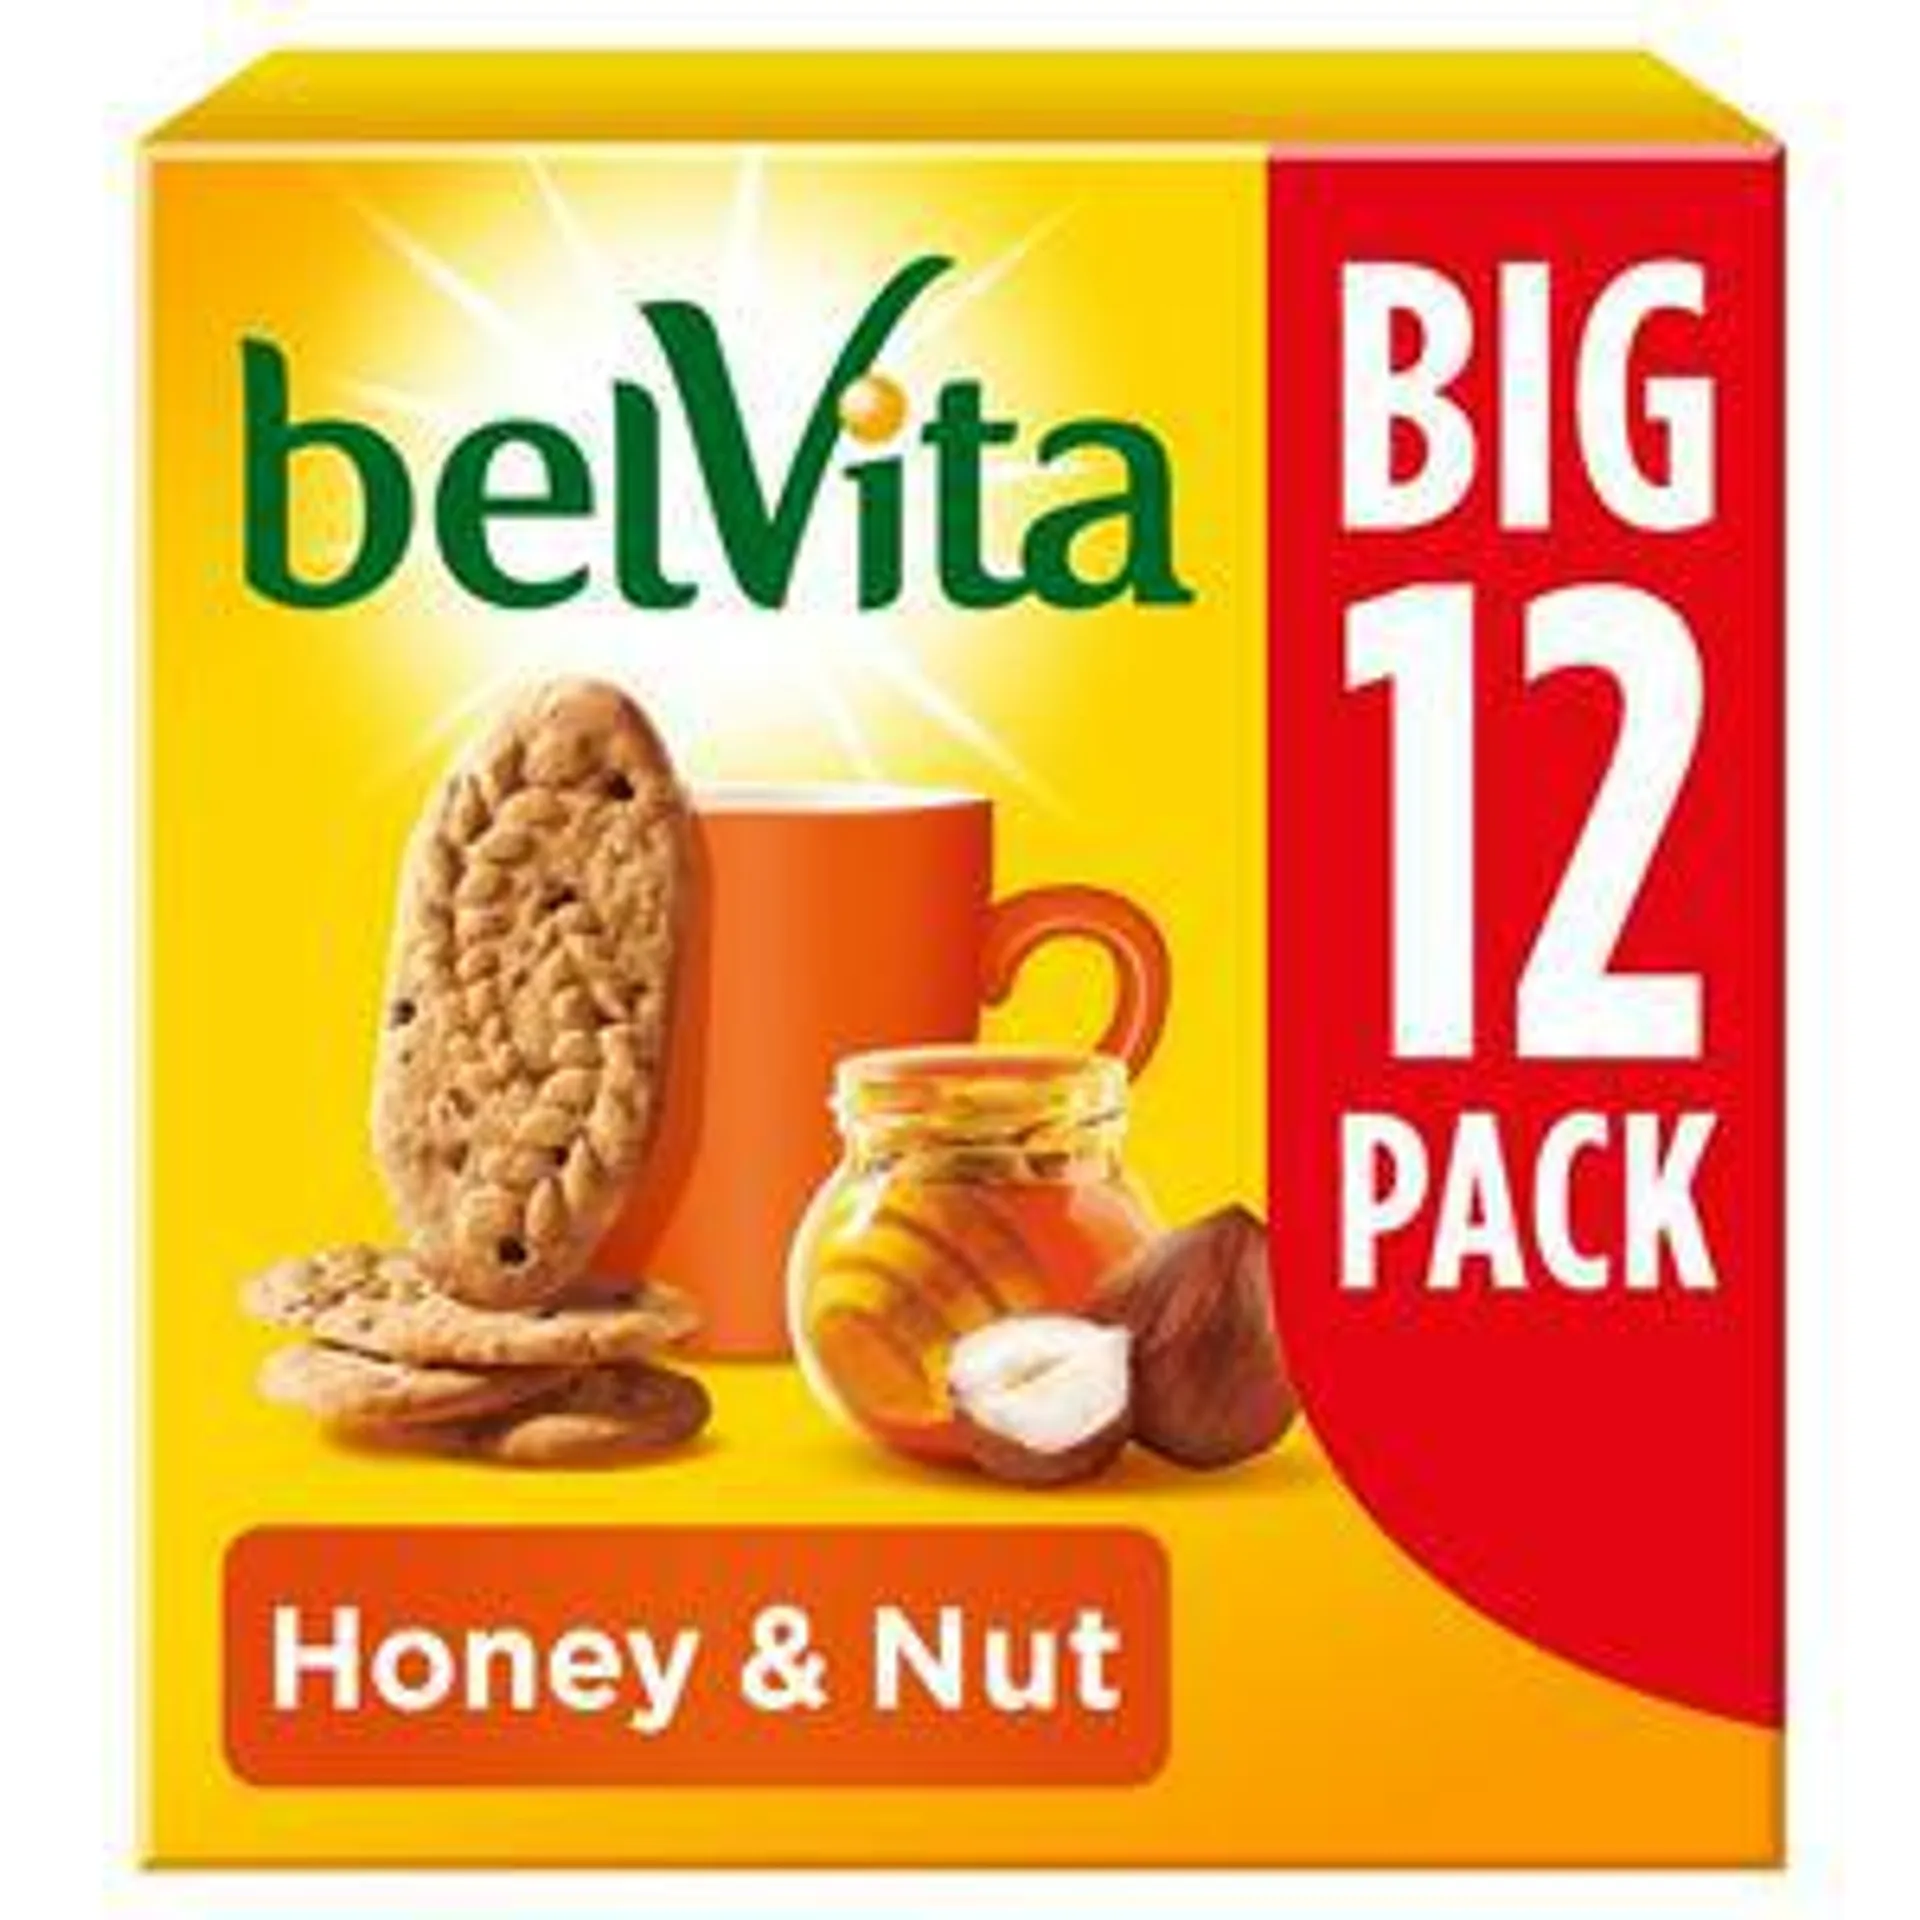 Belvita Breakfast Biscuits Honey & Nuts with Choc Chips Multipack x12 540g